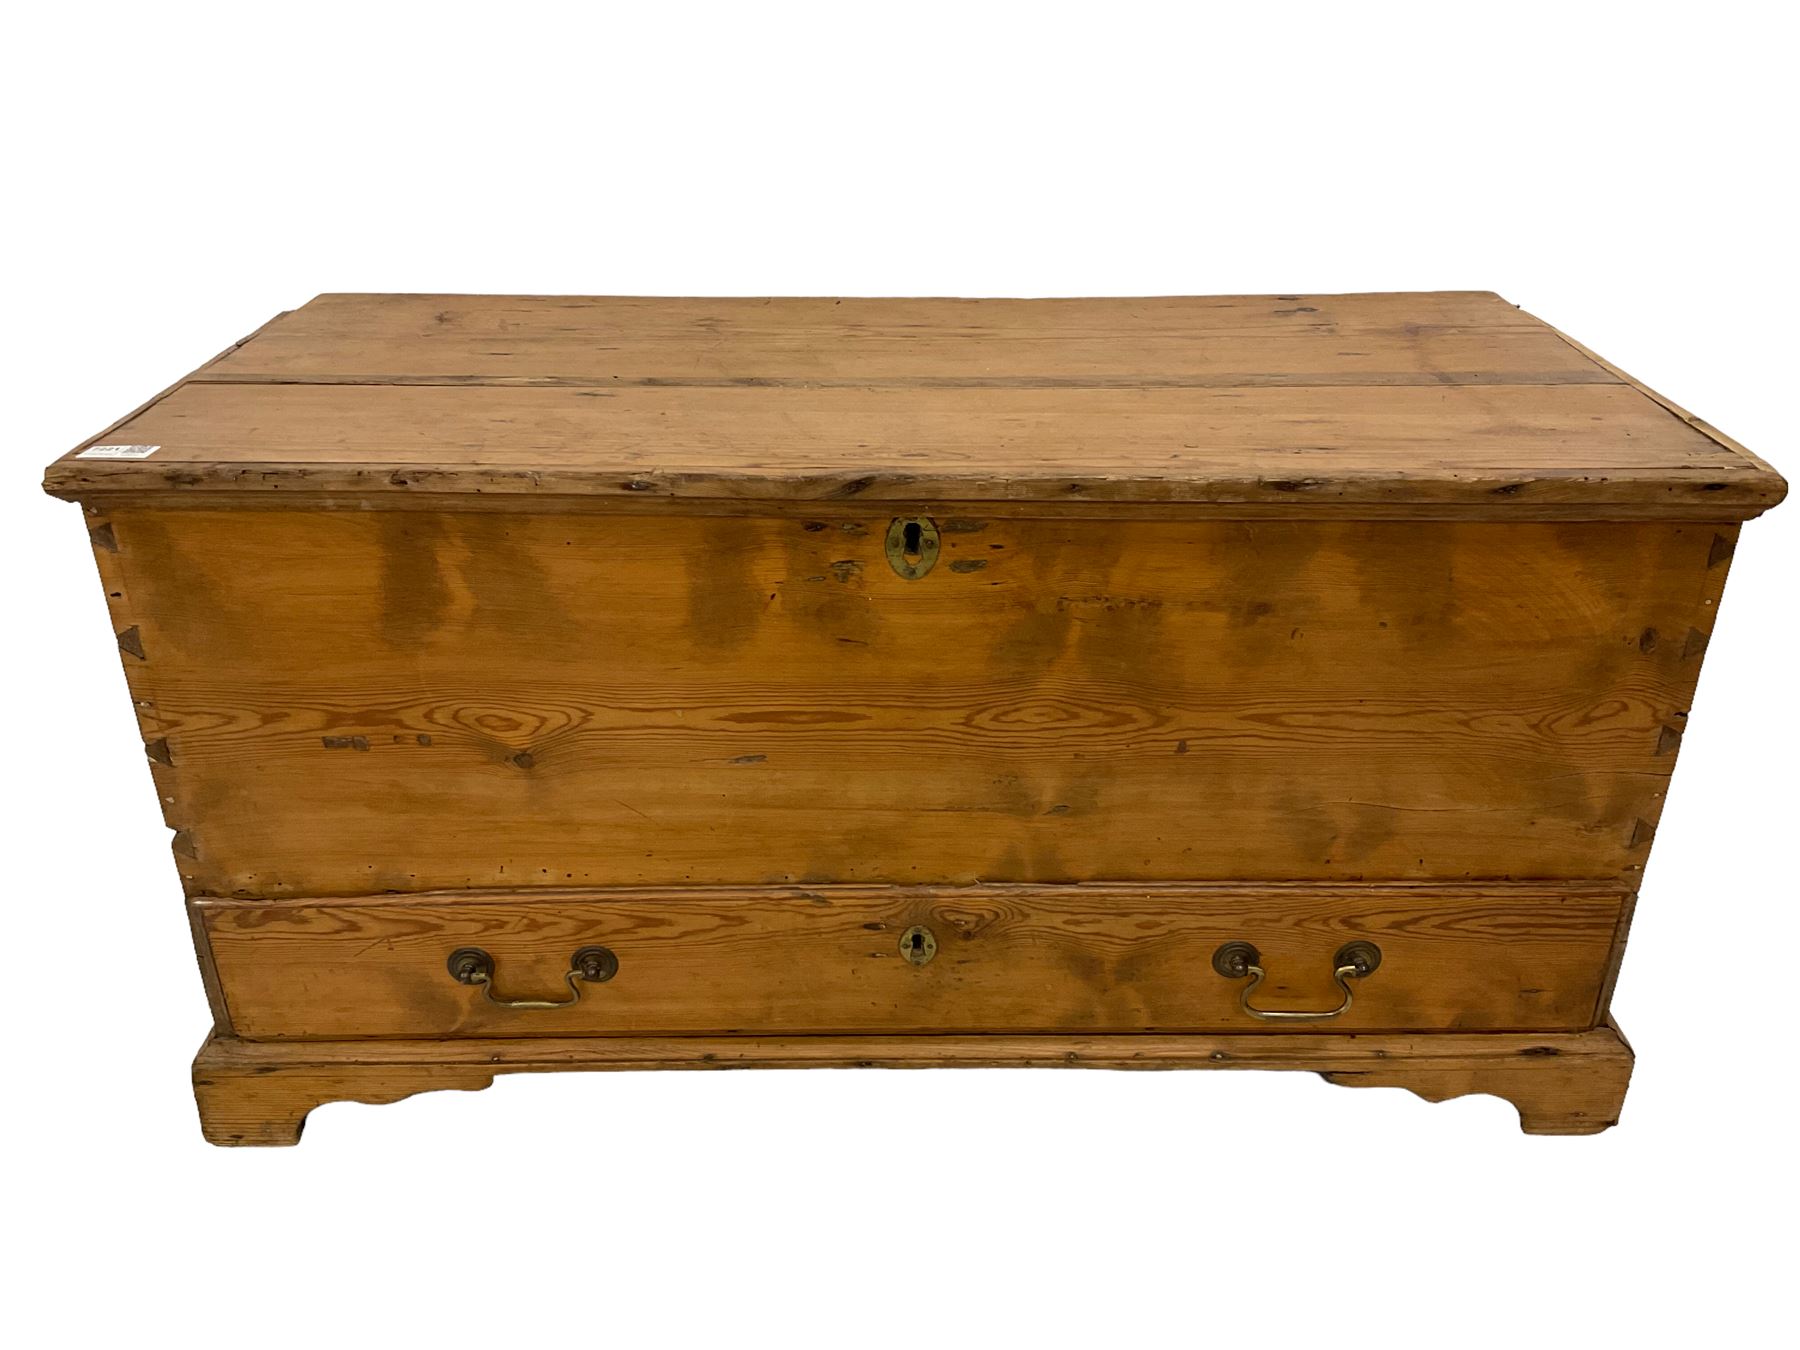 Late 19th century rustic pine mule chest